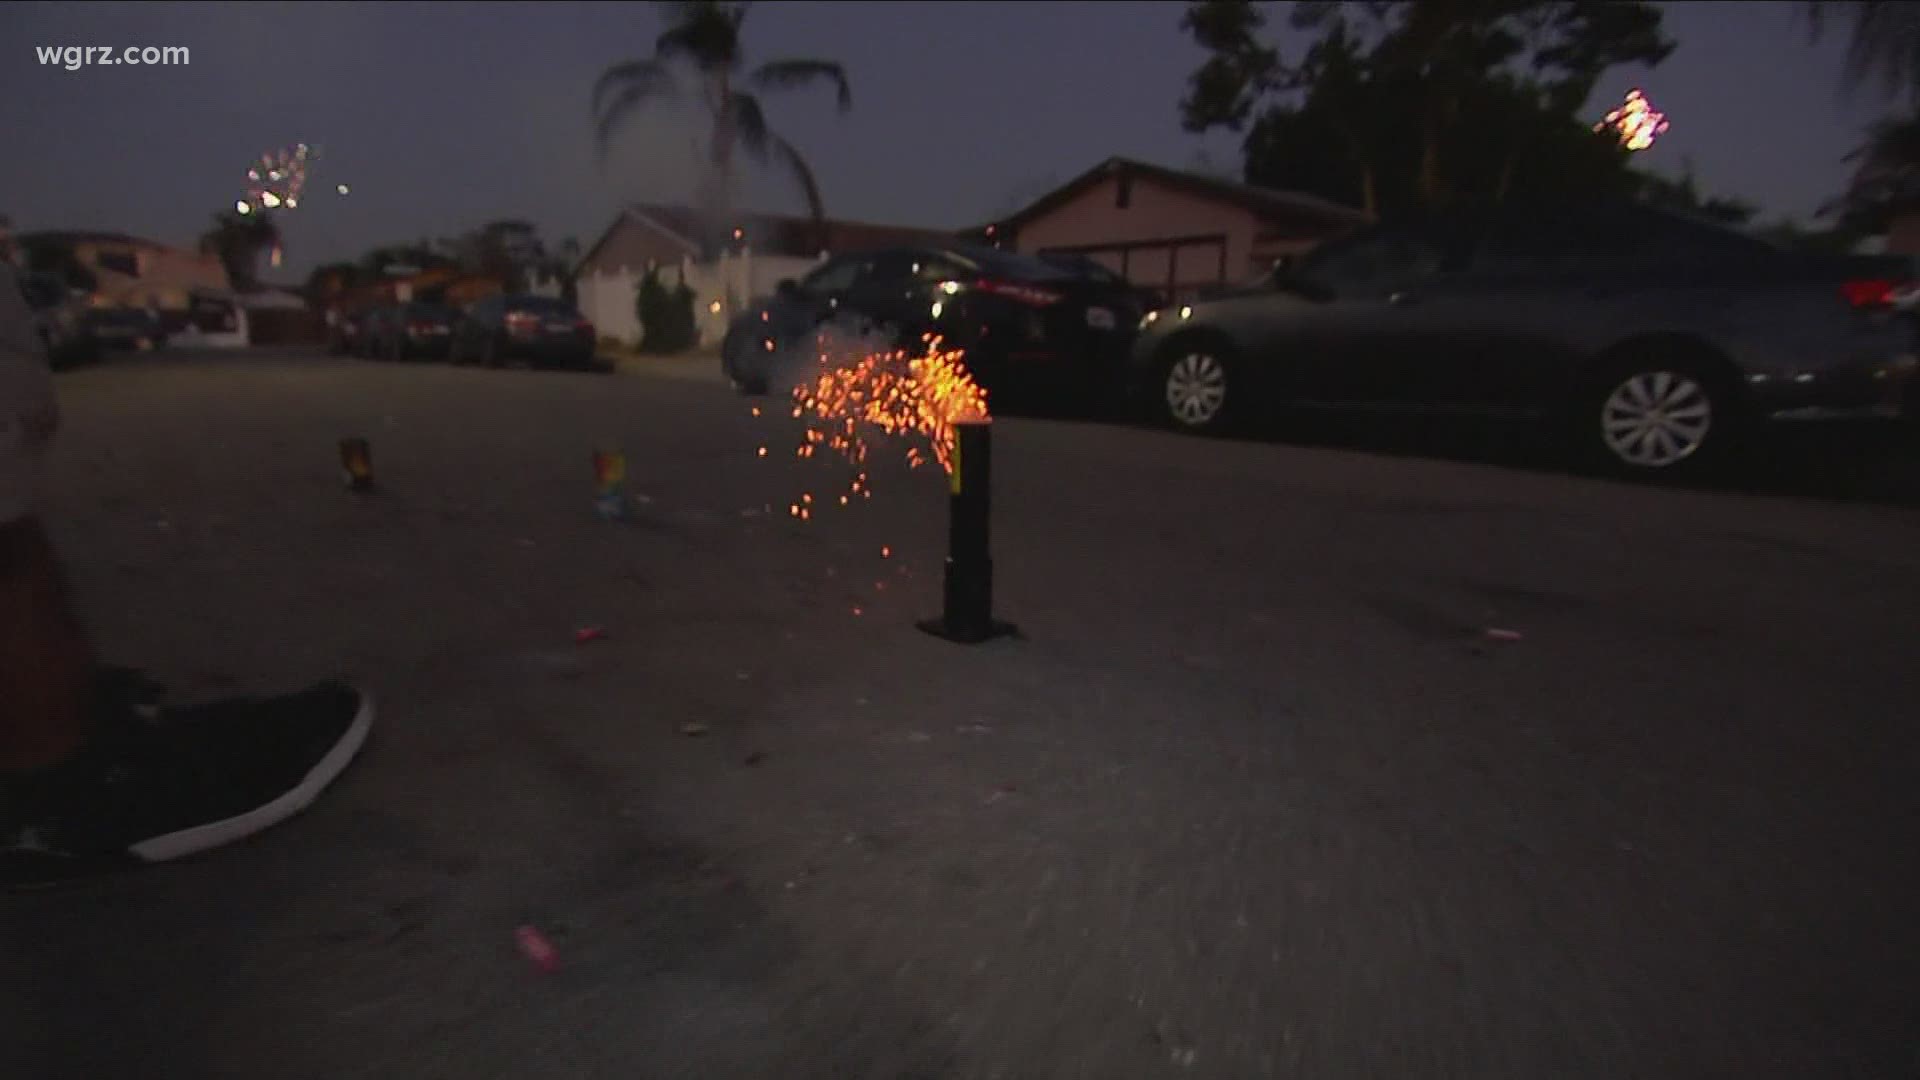 CPSC: careful when dealing with sparklers